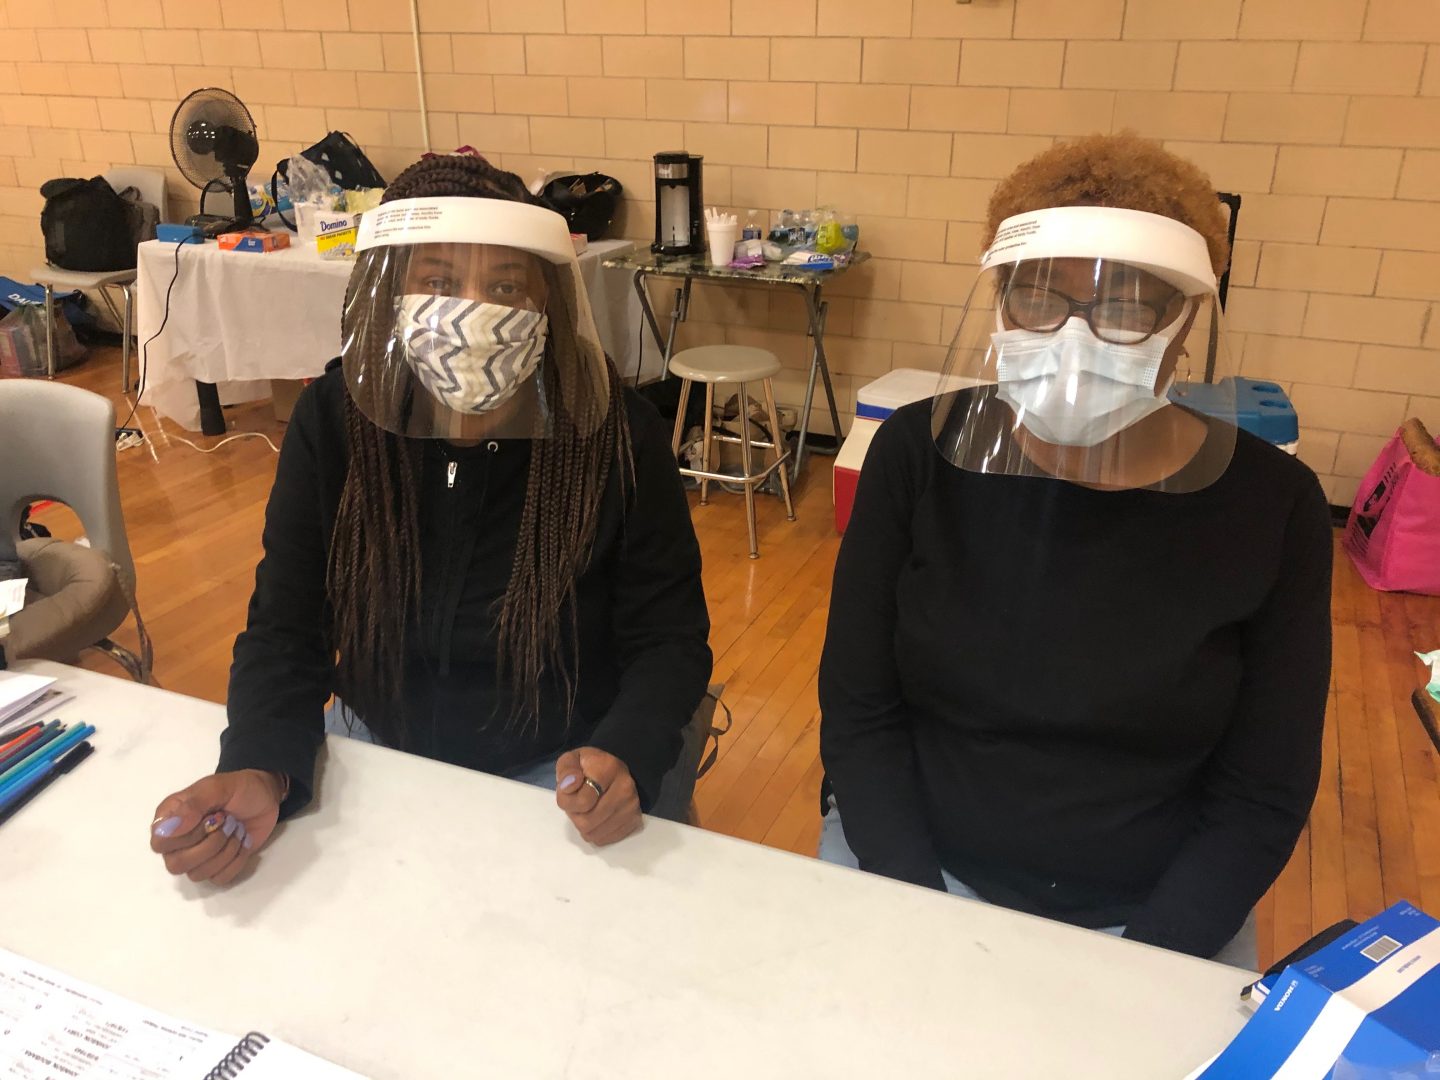 Poll workers at the 1st Ward/1st precinct in Harrisburg, Pa. wear face masks and shields to protect them against coronavirus during voting in the June 2, 2020, primary election.